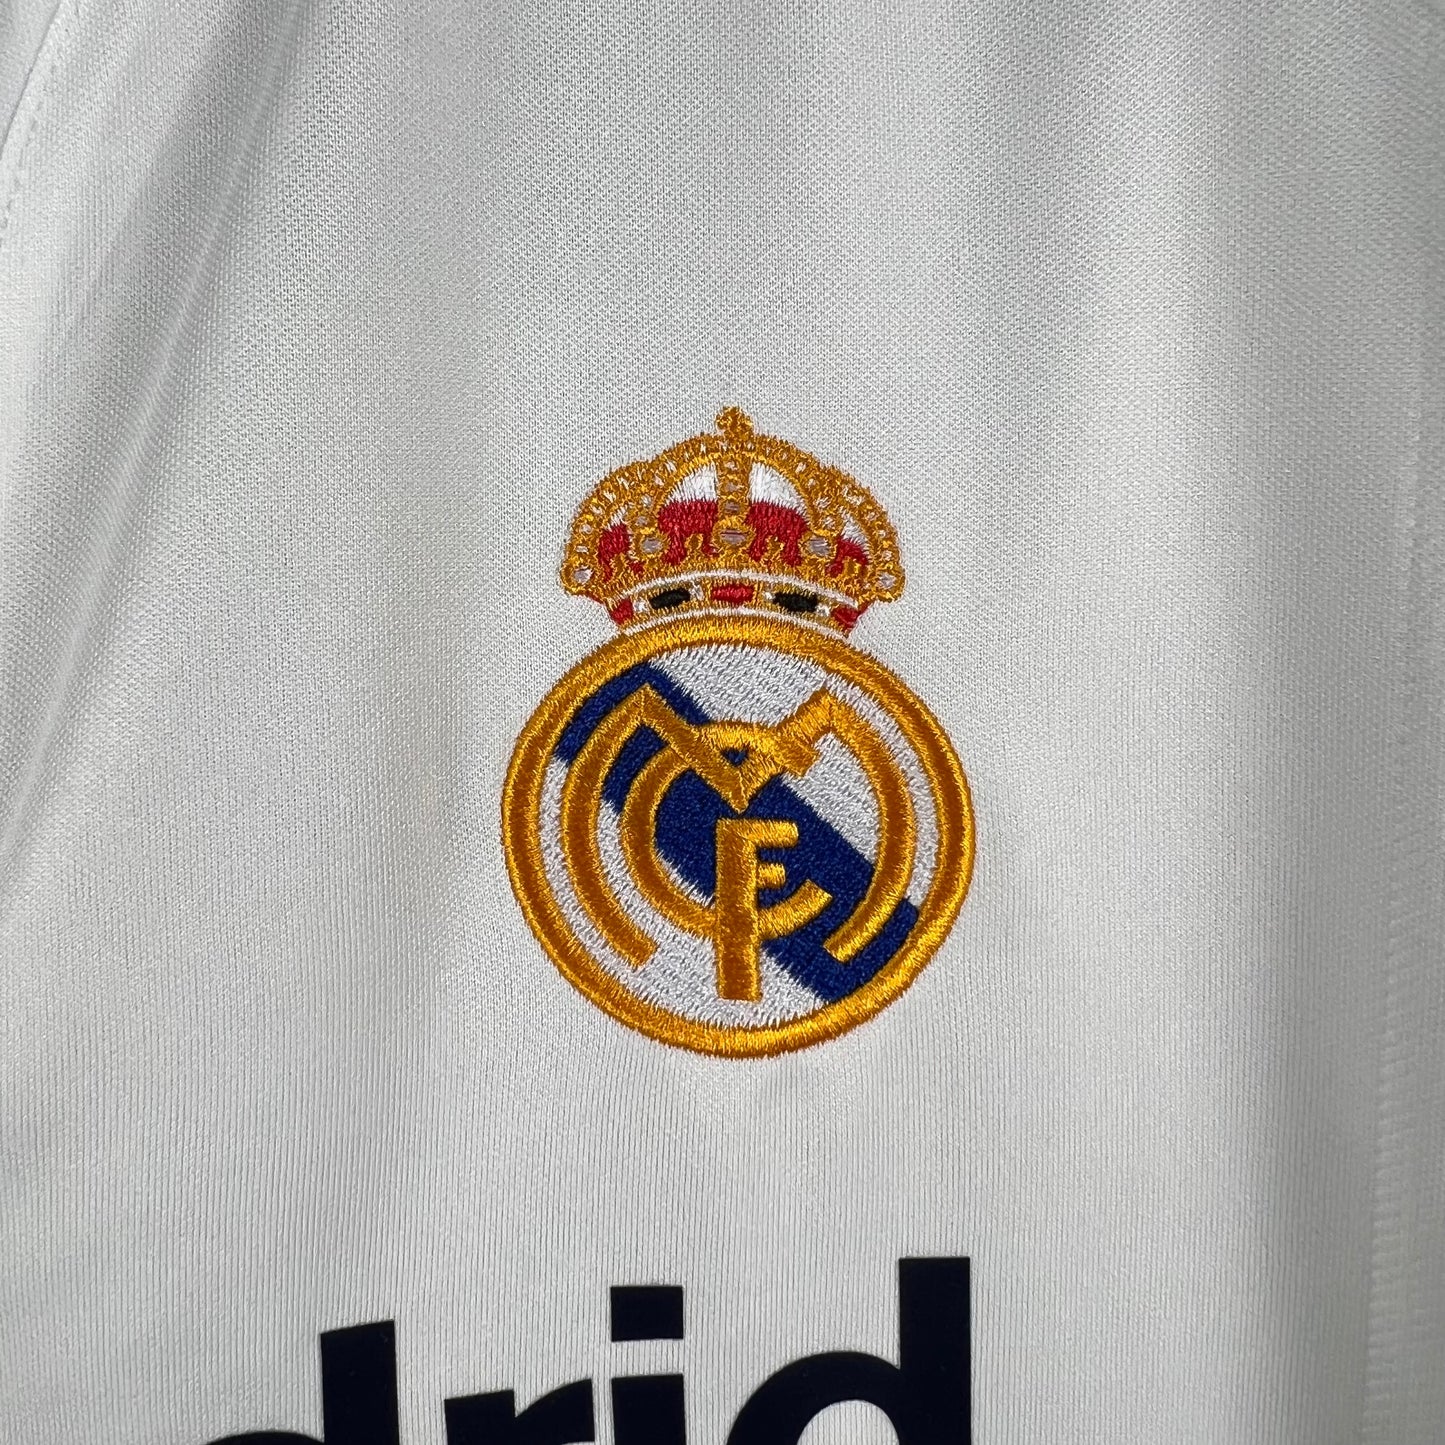 Real Madrid 2001/02 Home Jersey